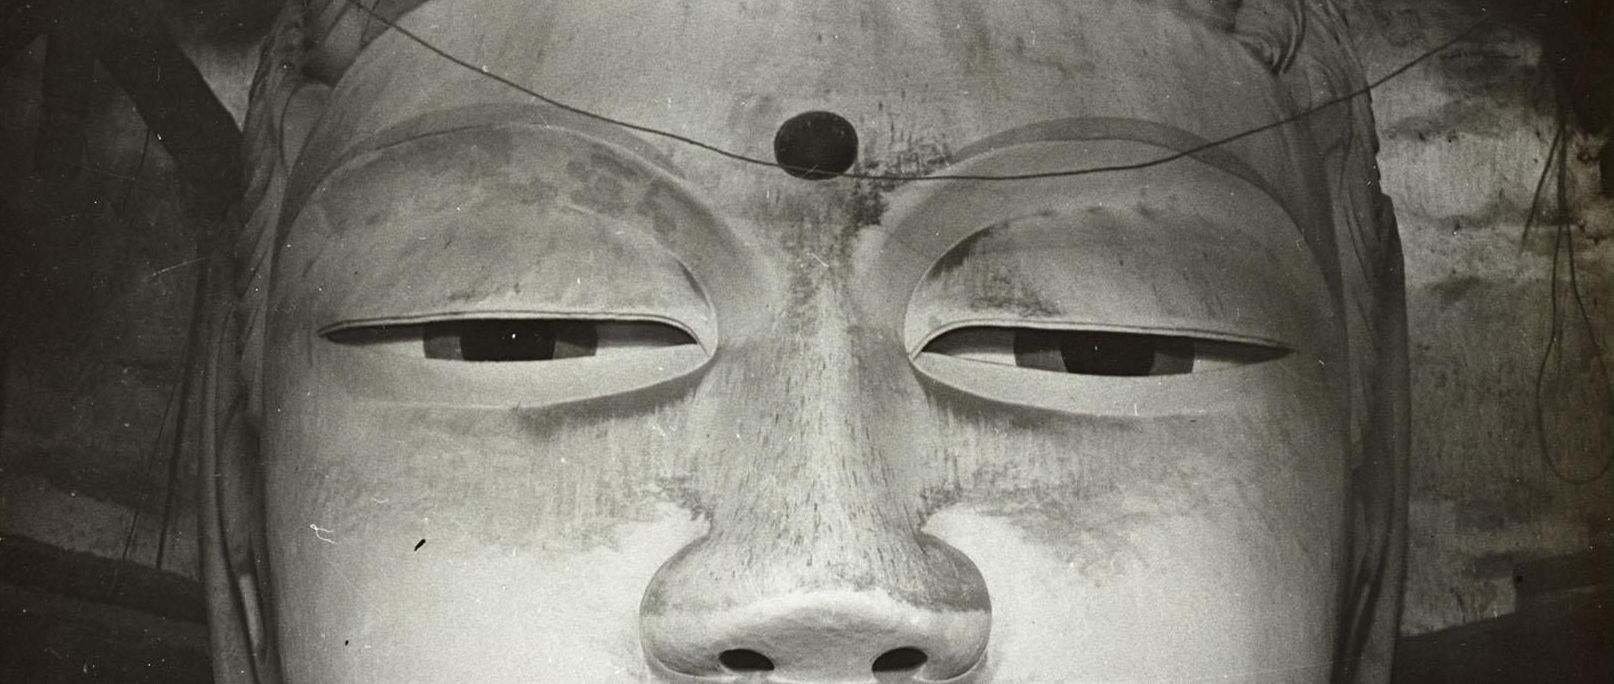 Photograph of the head of a Buddha statue from Dunhuang Mogao cave 96.